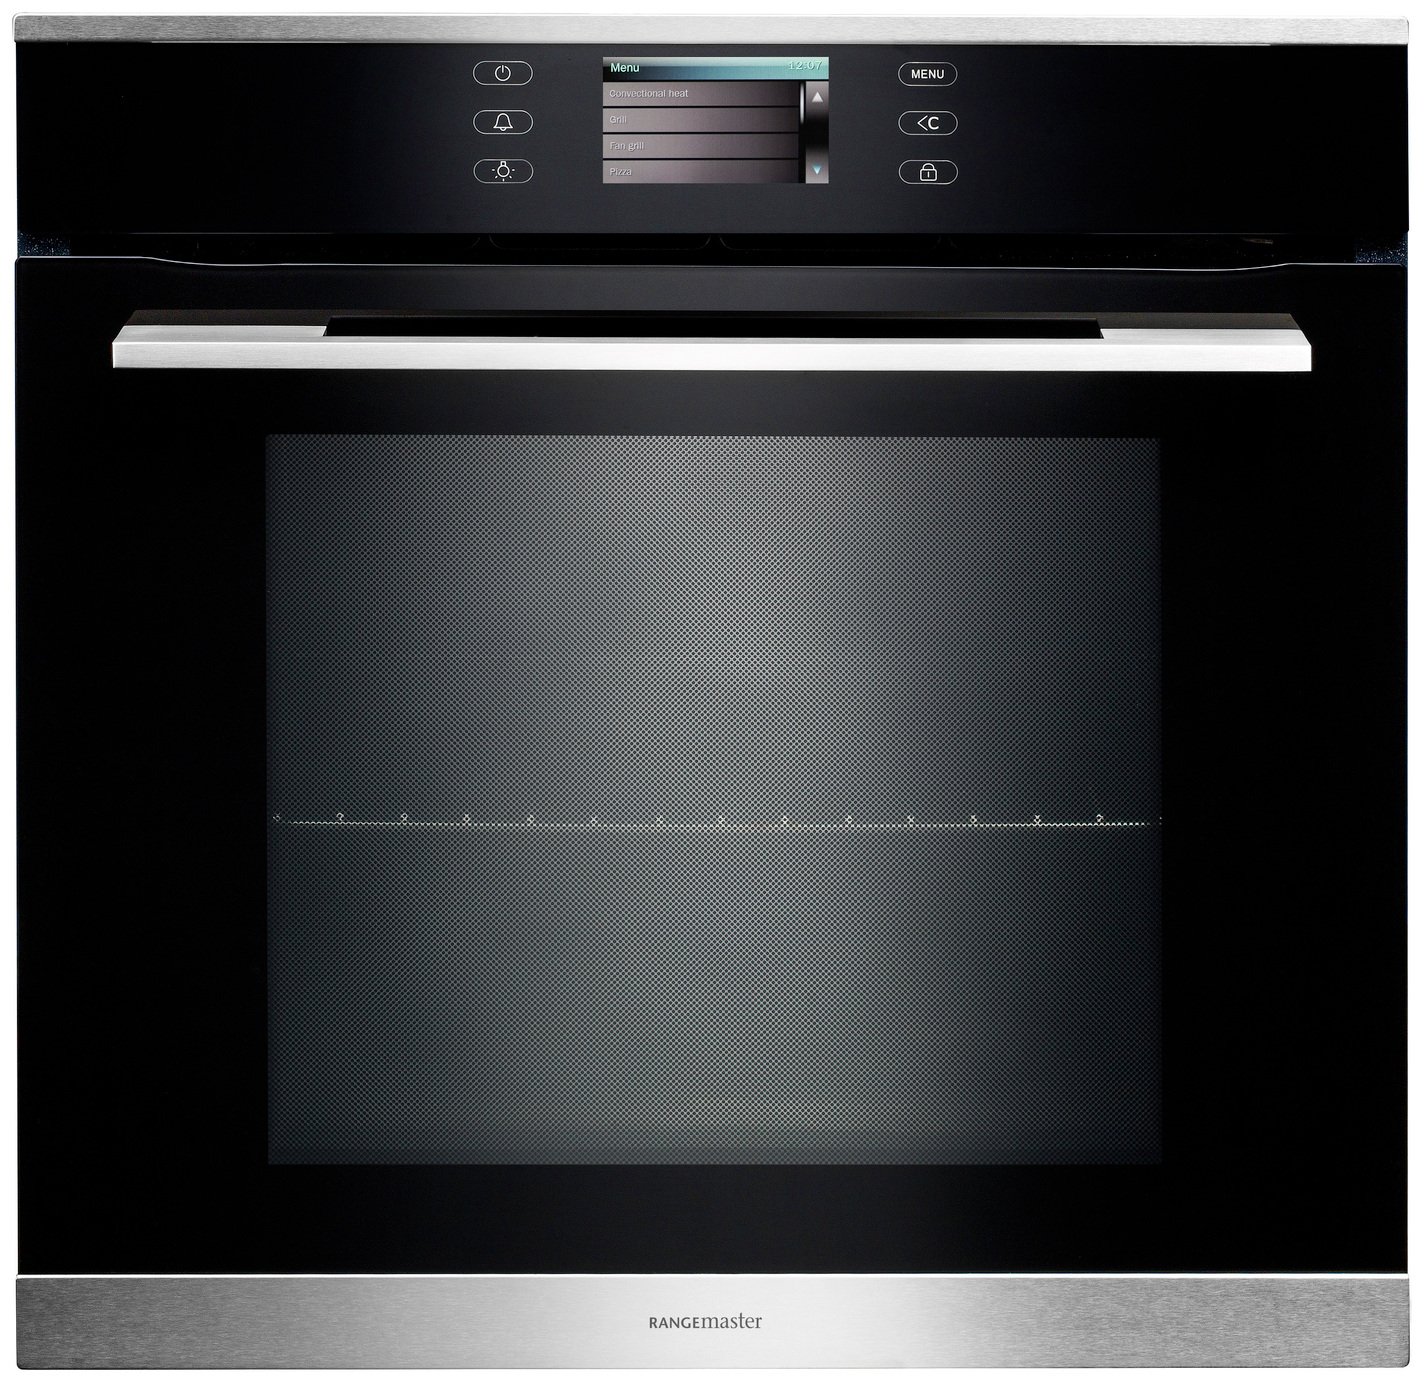 Rangemaster RMB610PBL/SS Built In Electric Oven - Black